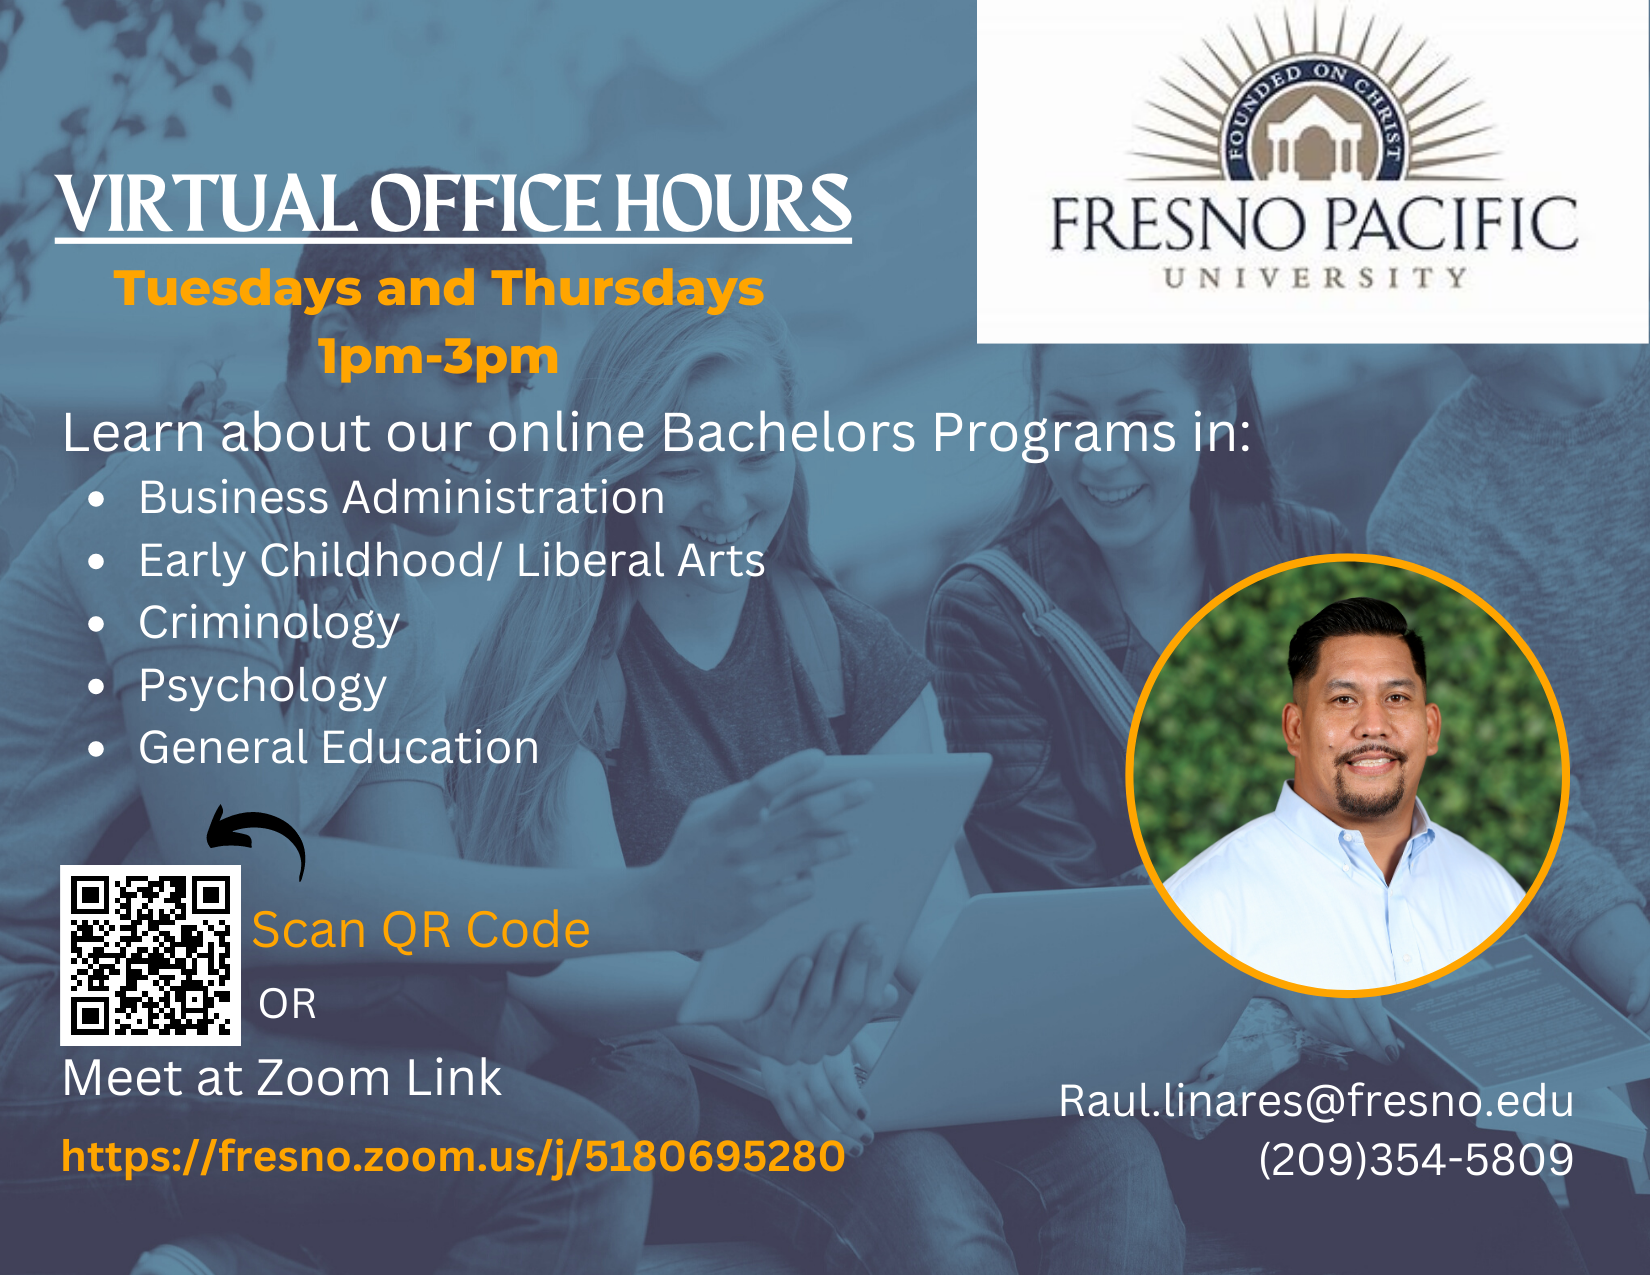 Virtual Office Hours FPU